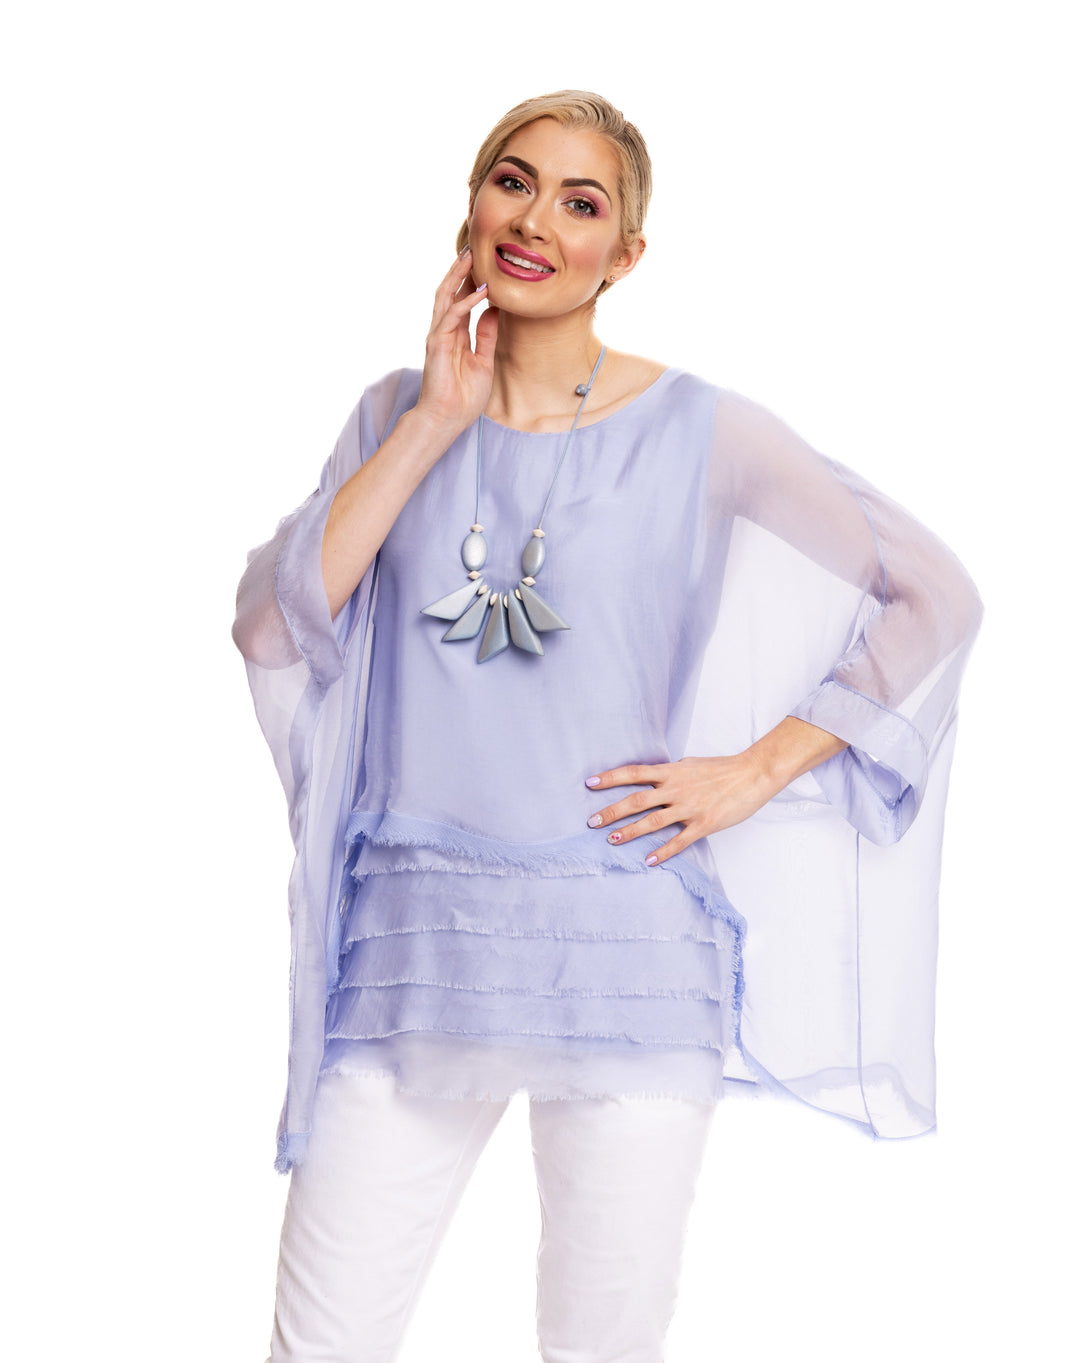 Amulet Top in Periwinkle - Imagine Fashion